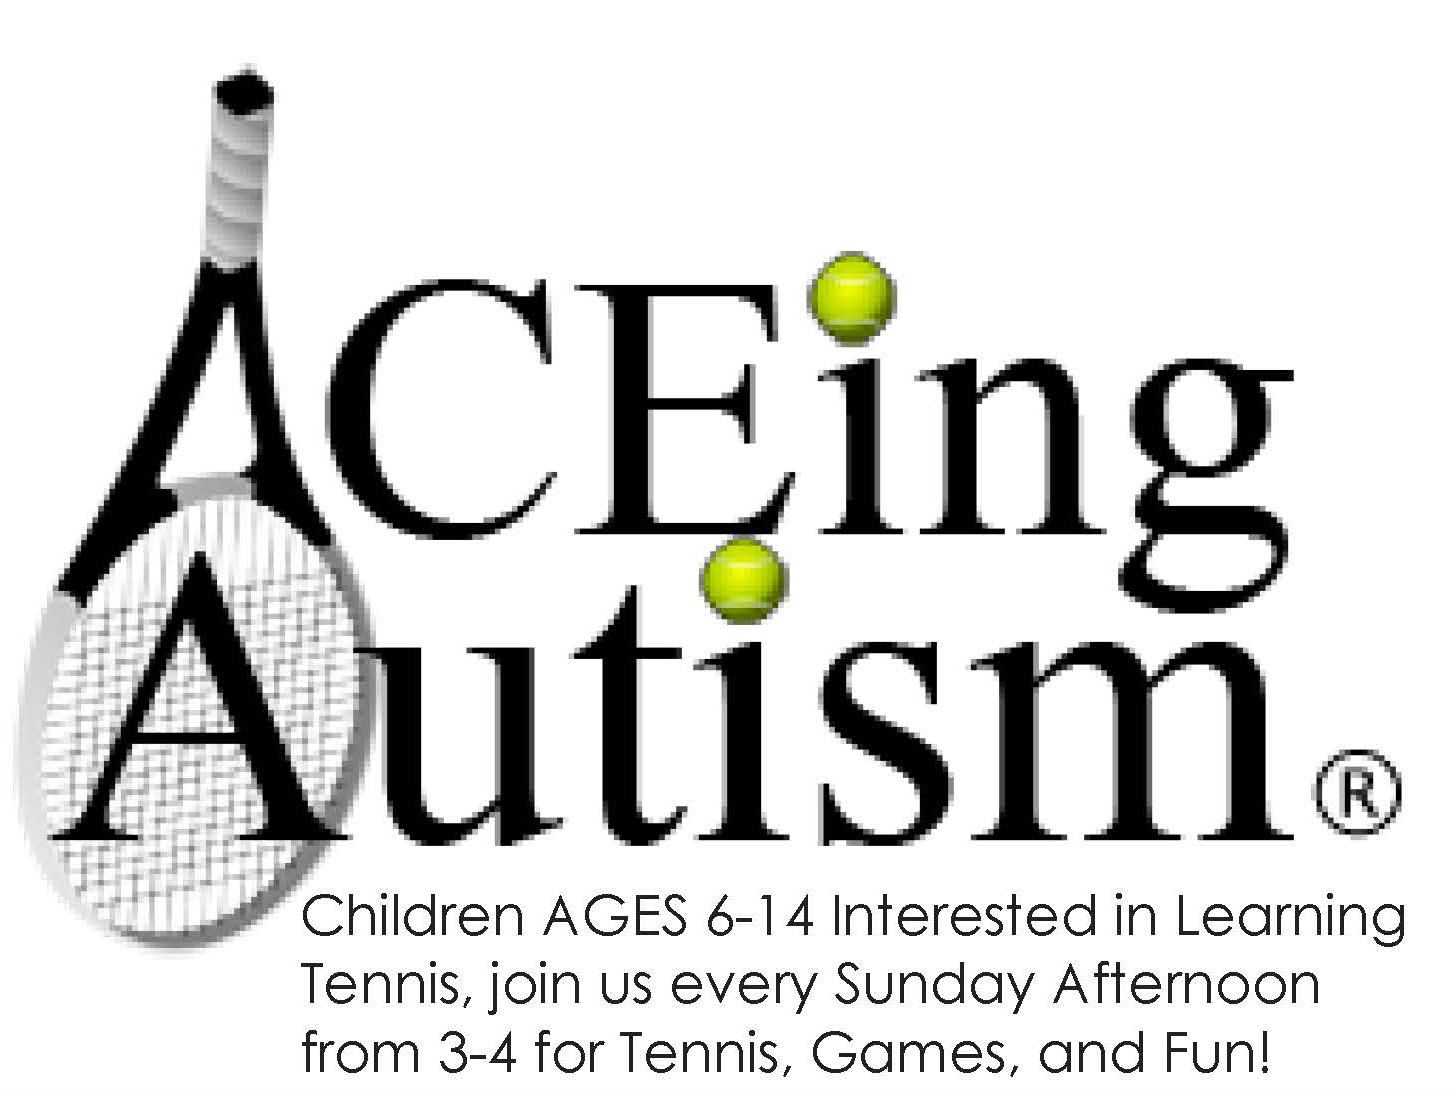 ACEing Autism, organized by Vanderbilt student Chandler Semjen, is seeking children with autism ages 6-14 to learn the game of tennis and have fun at the same time.